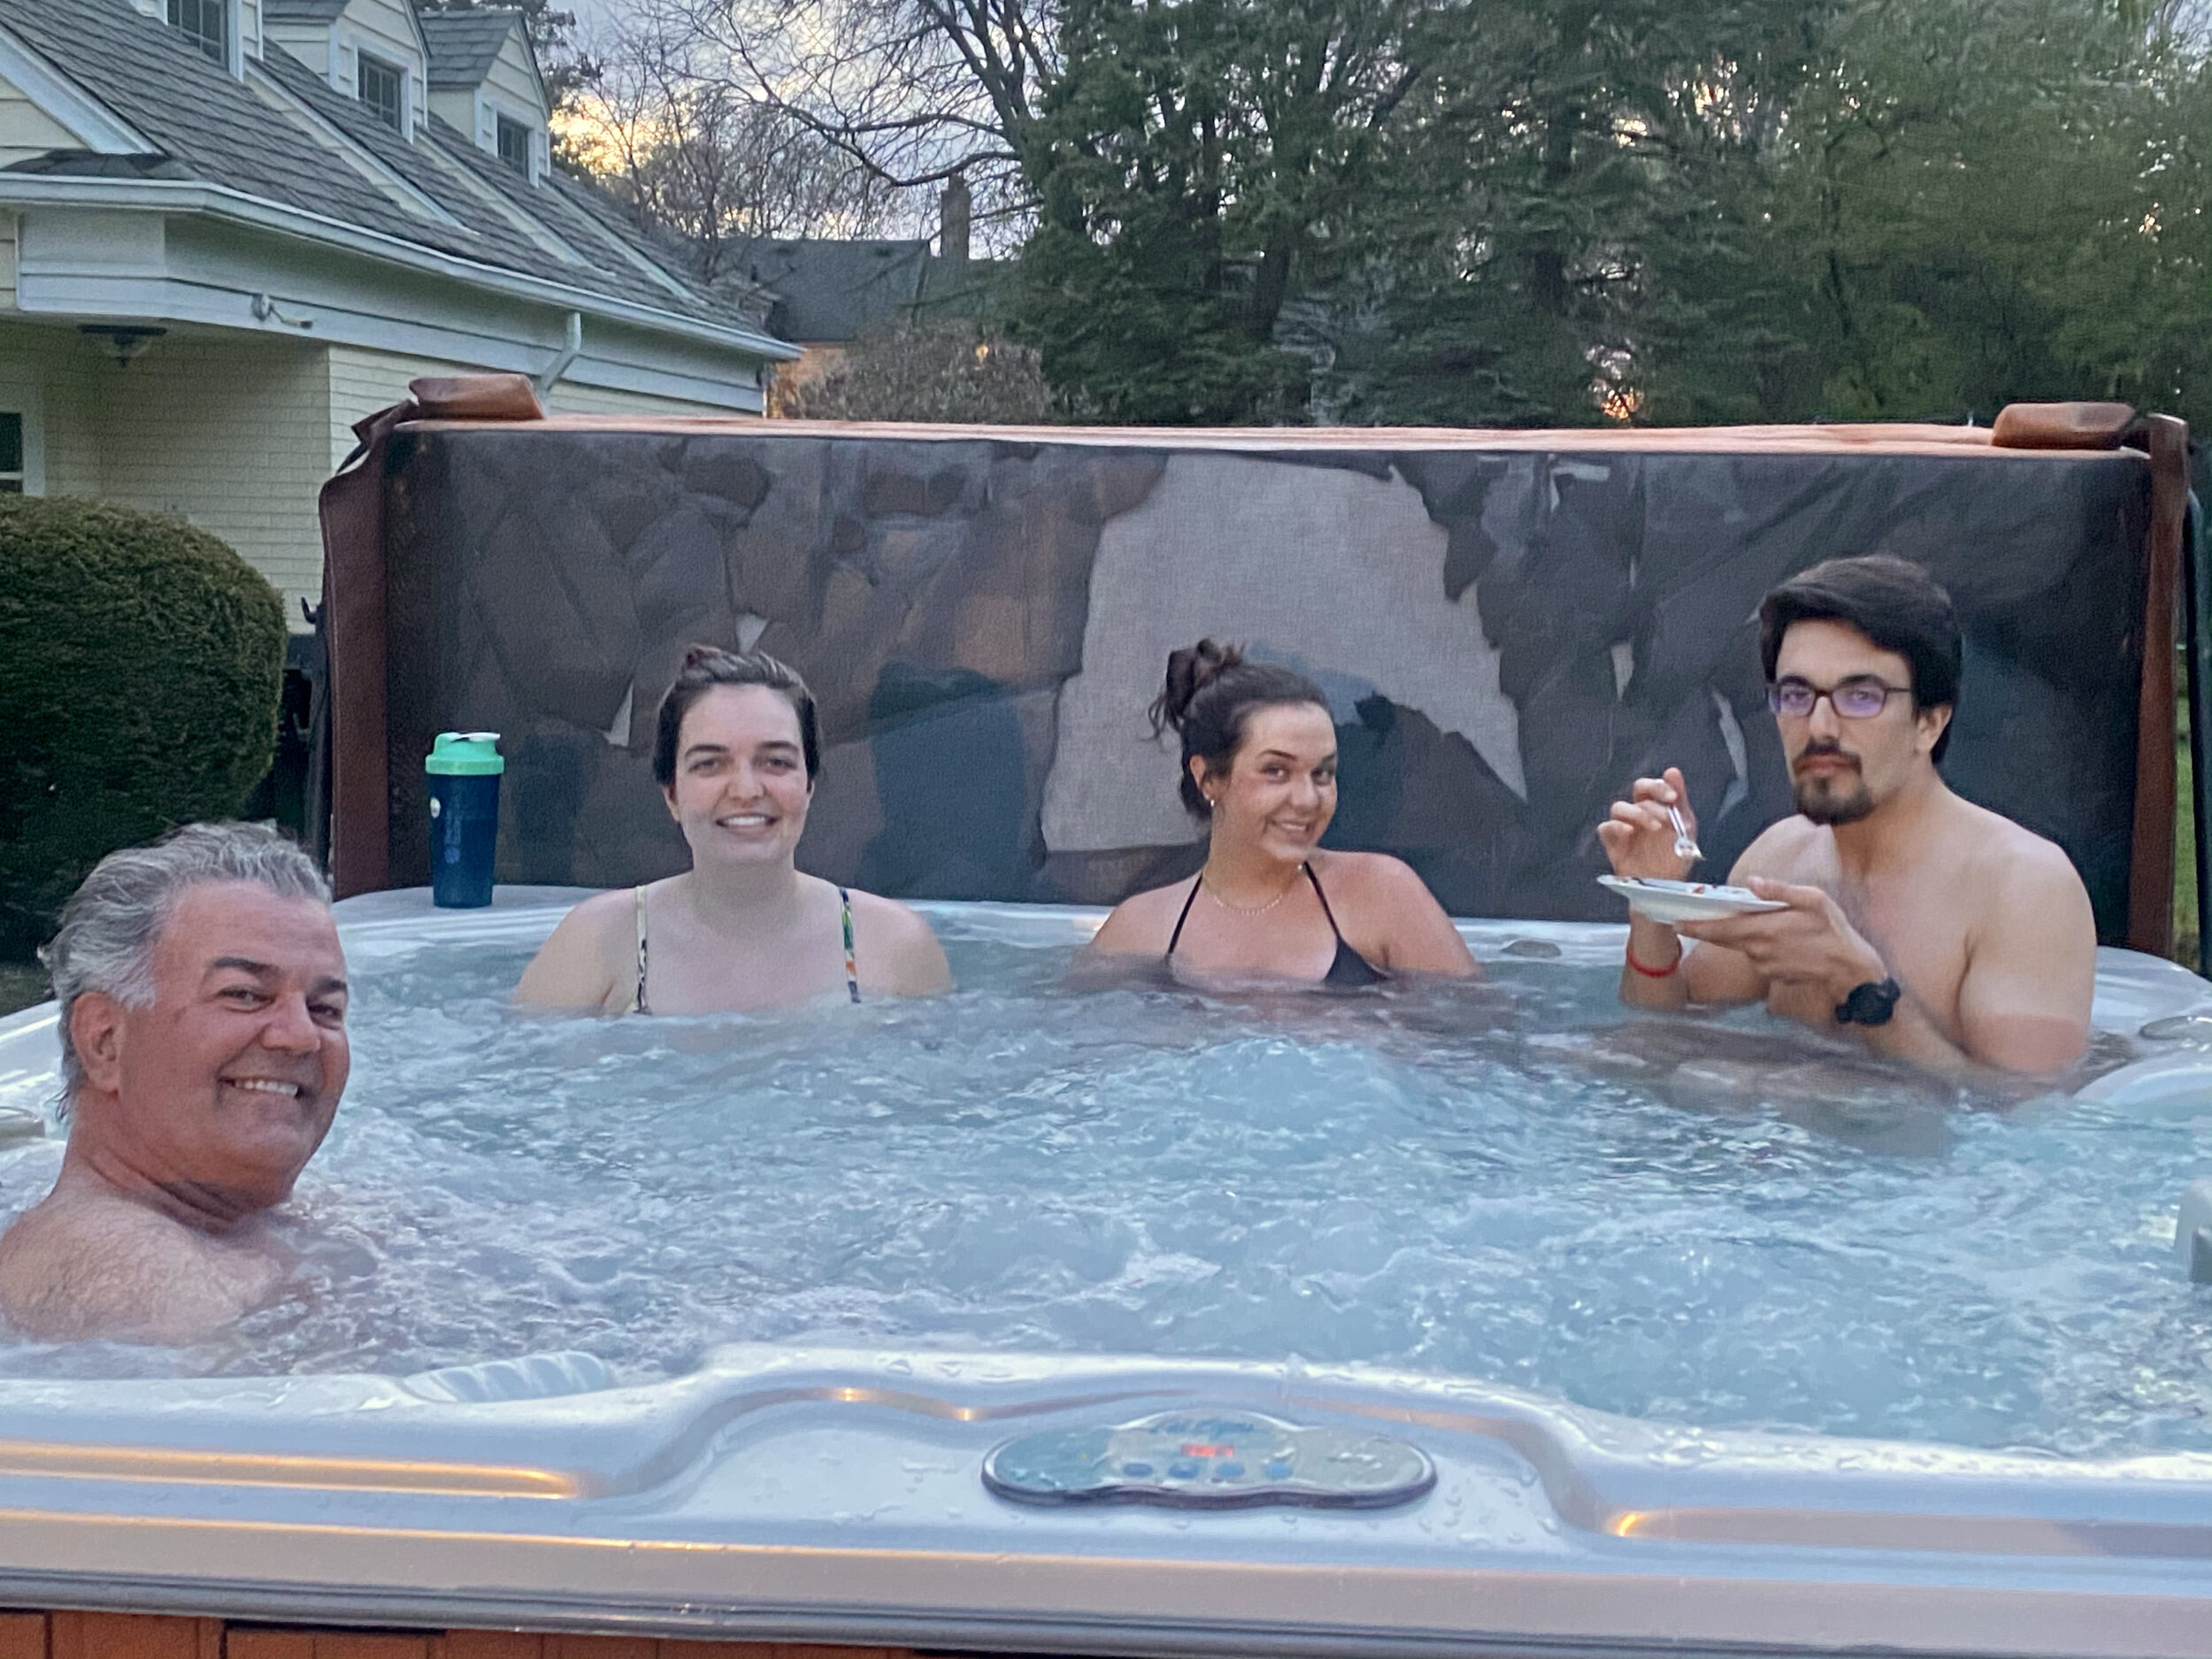 Jacuzzi time is the best time.